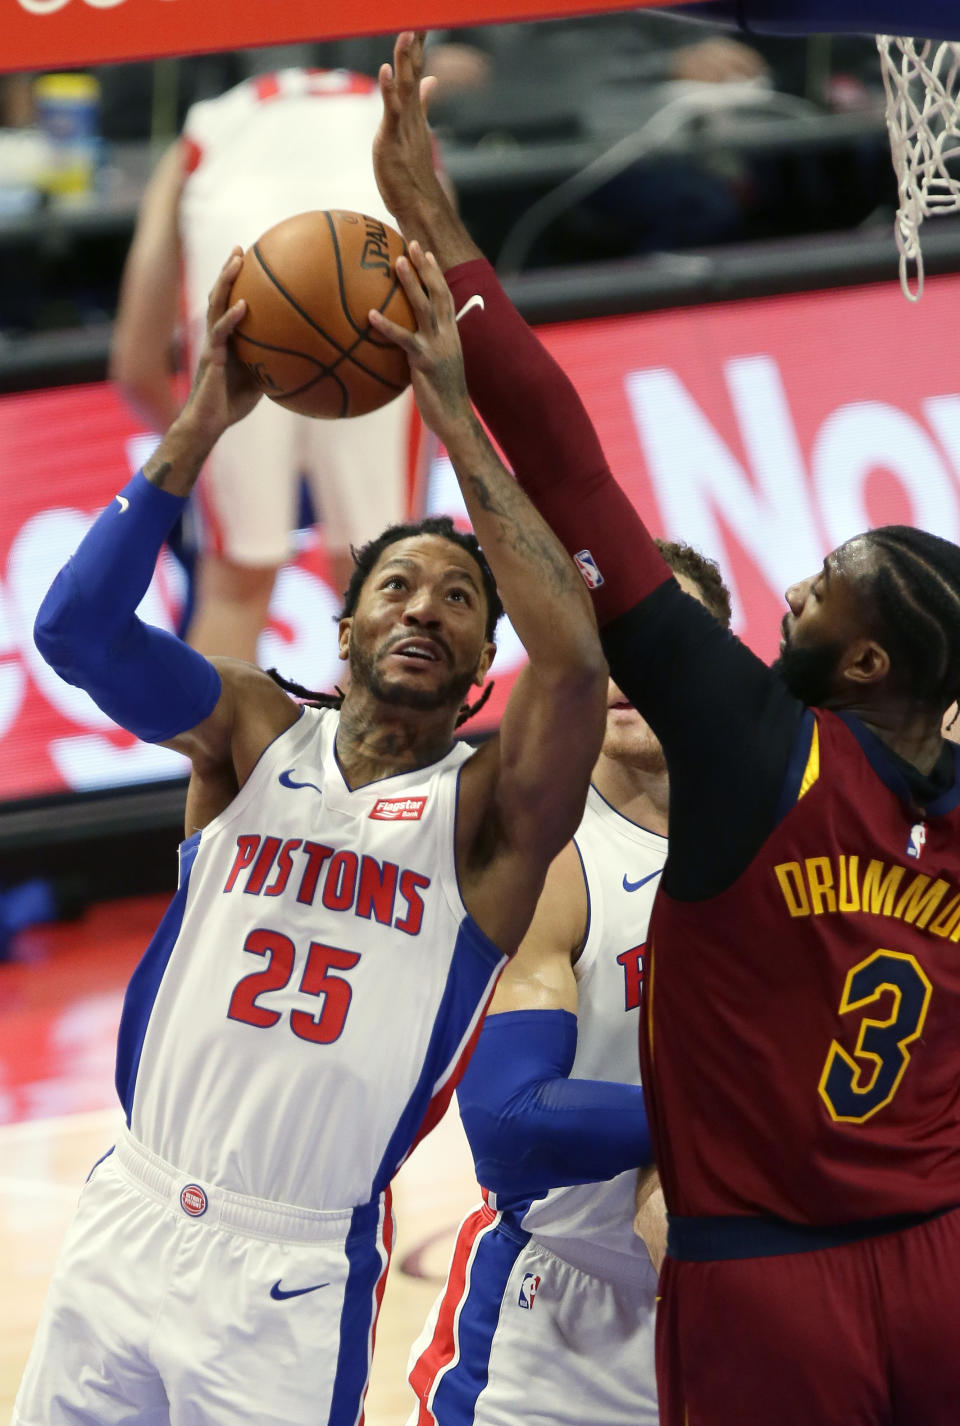 Detroit Pistons guard Derrick Rose, left, goes to the basket against Cleveland Cavaliers center Andre Drummond, right, during the first half of an NBA basketball game Saturday, Dec. 26, 2020, in Detroit. (AP Photo/Duane Burleson)